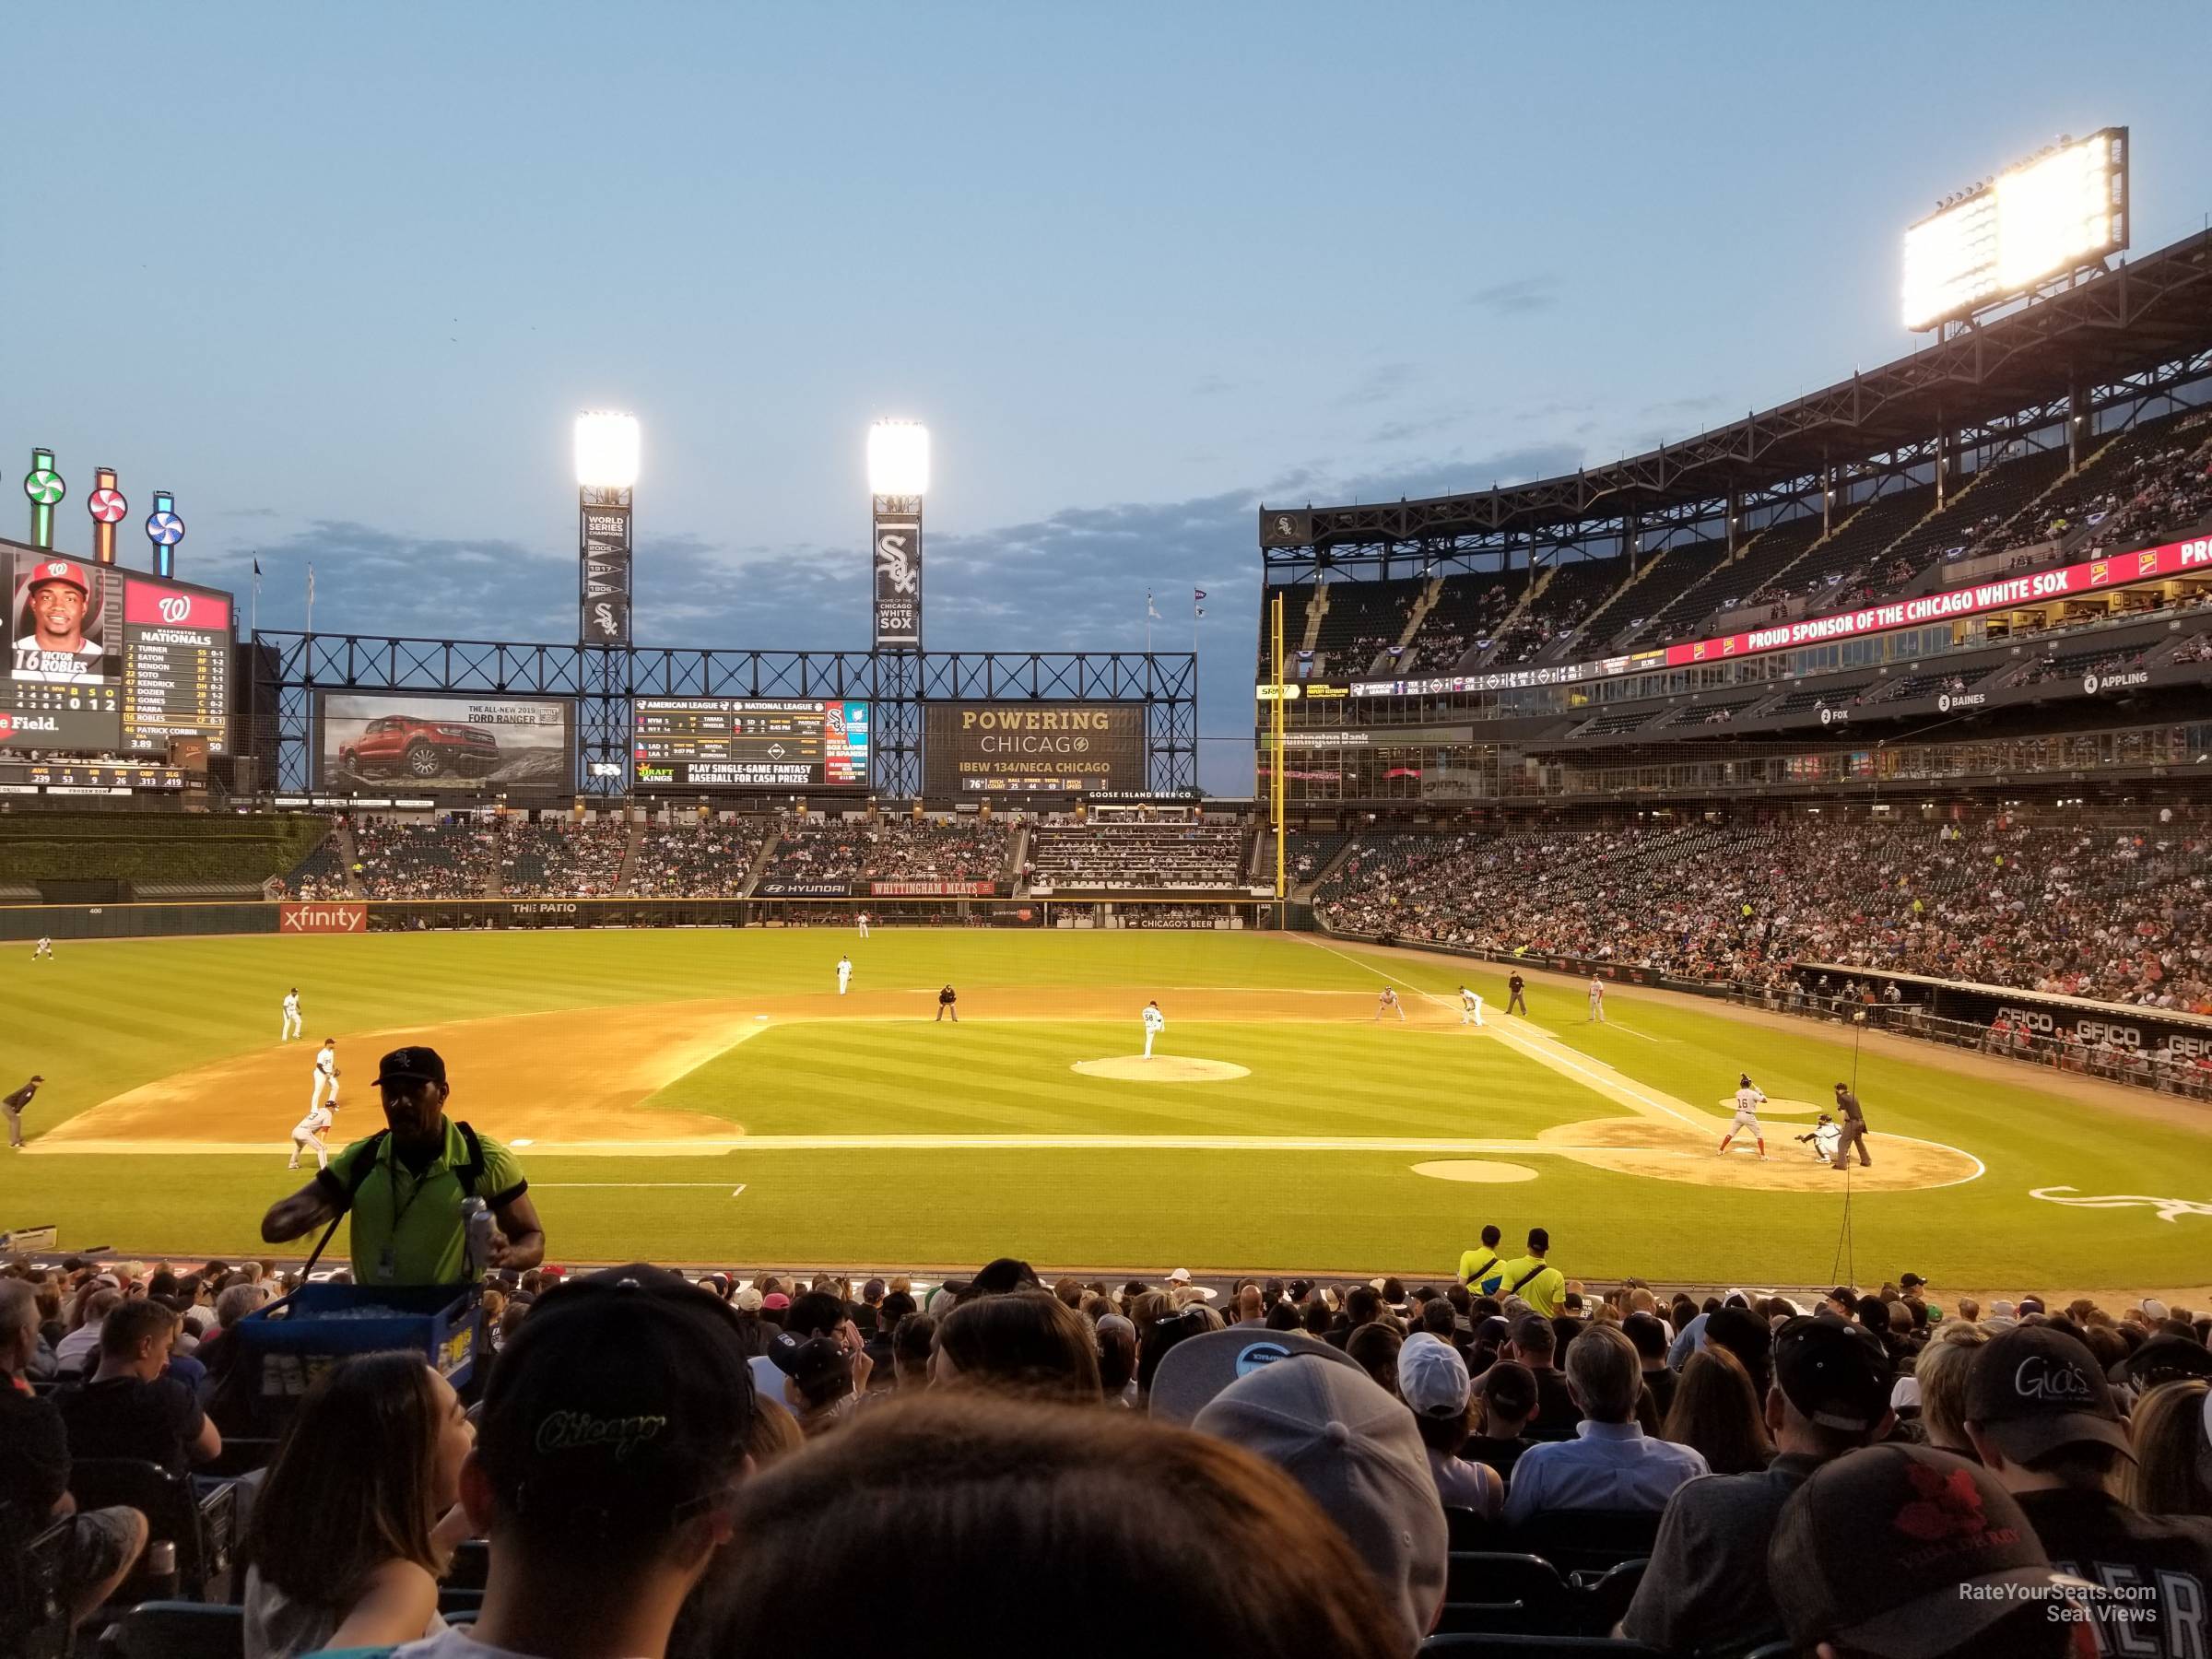 section 138, row 28 seat view  - guaranteed rate field